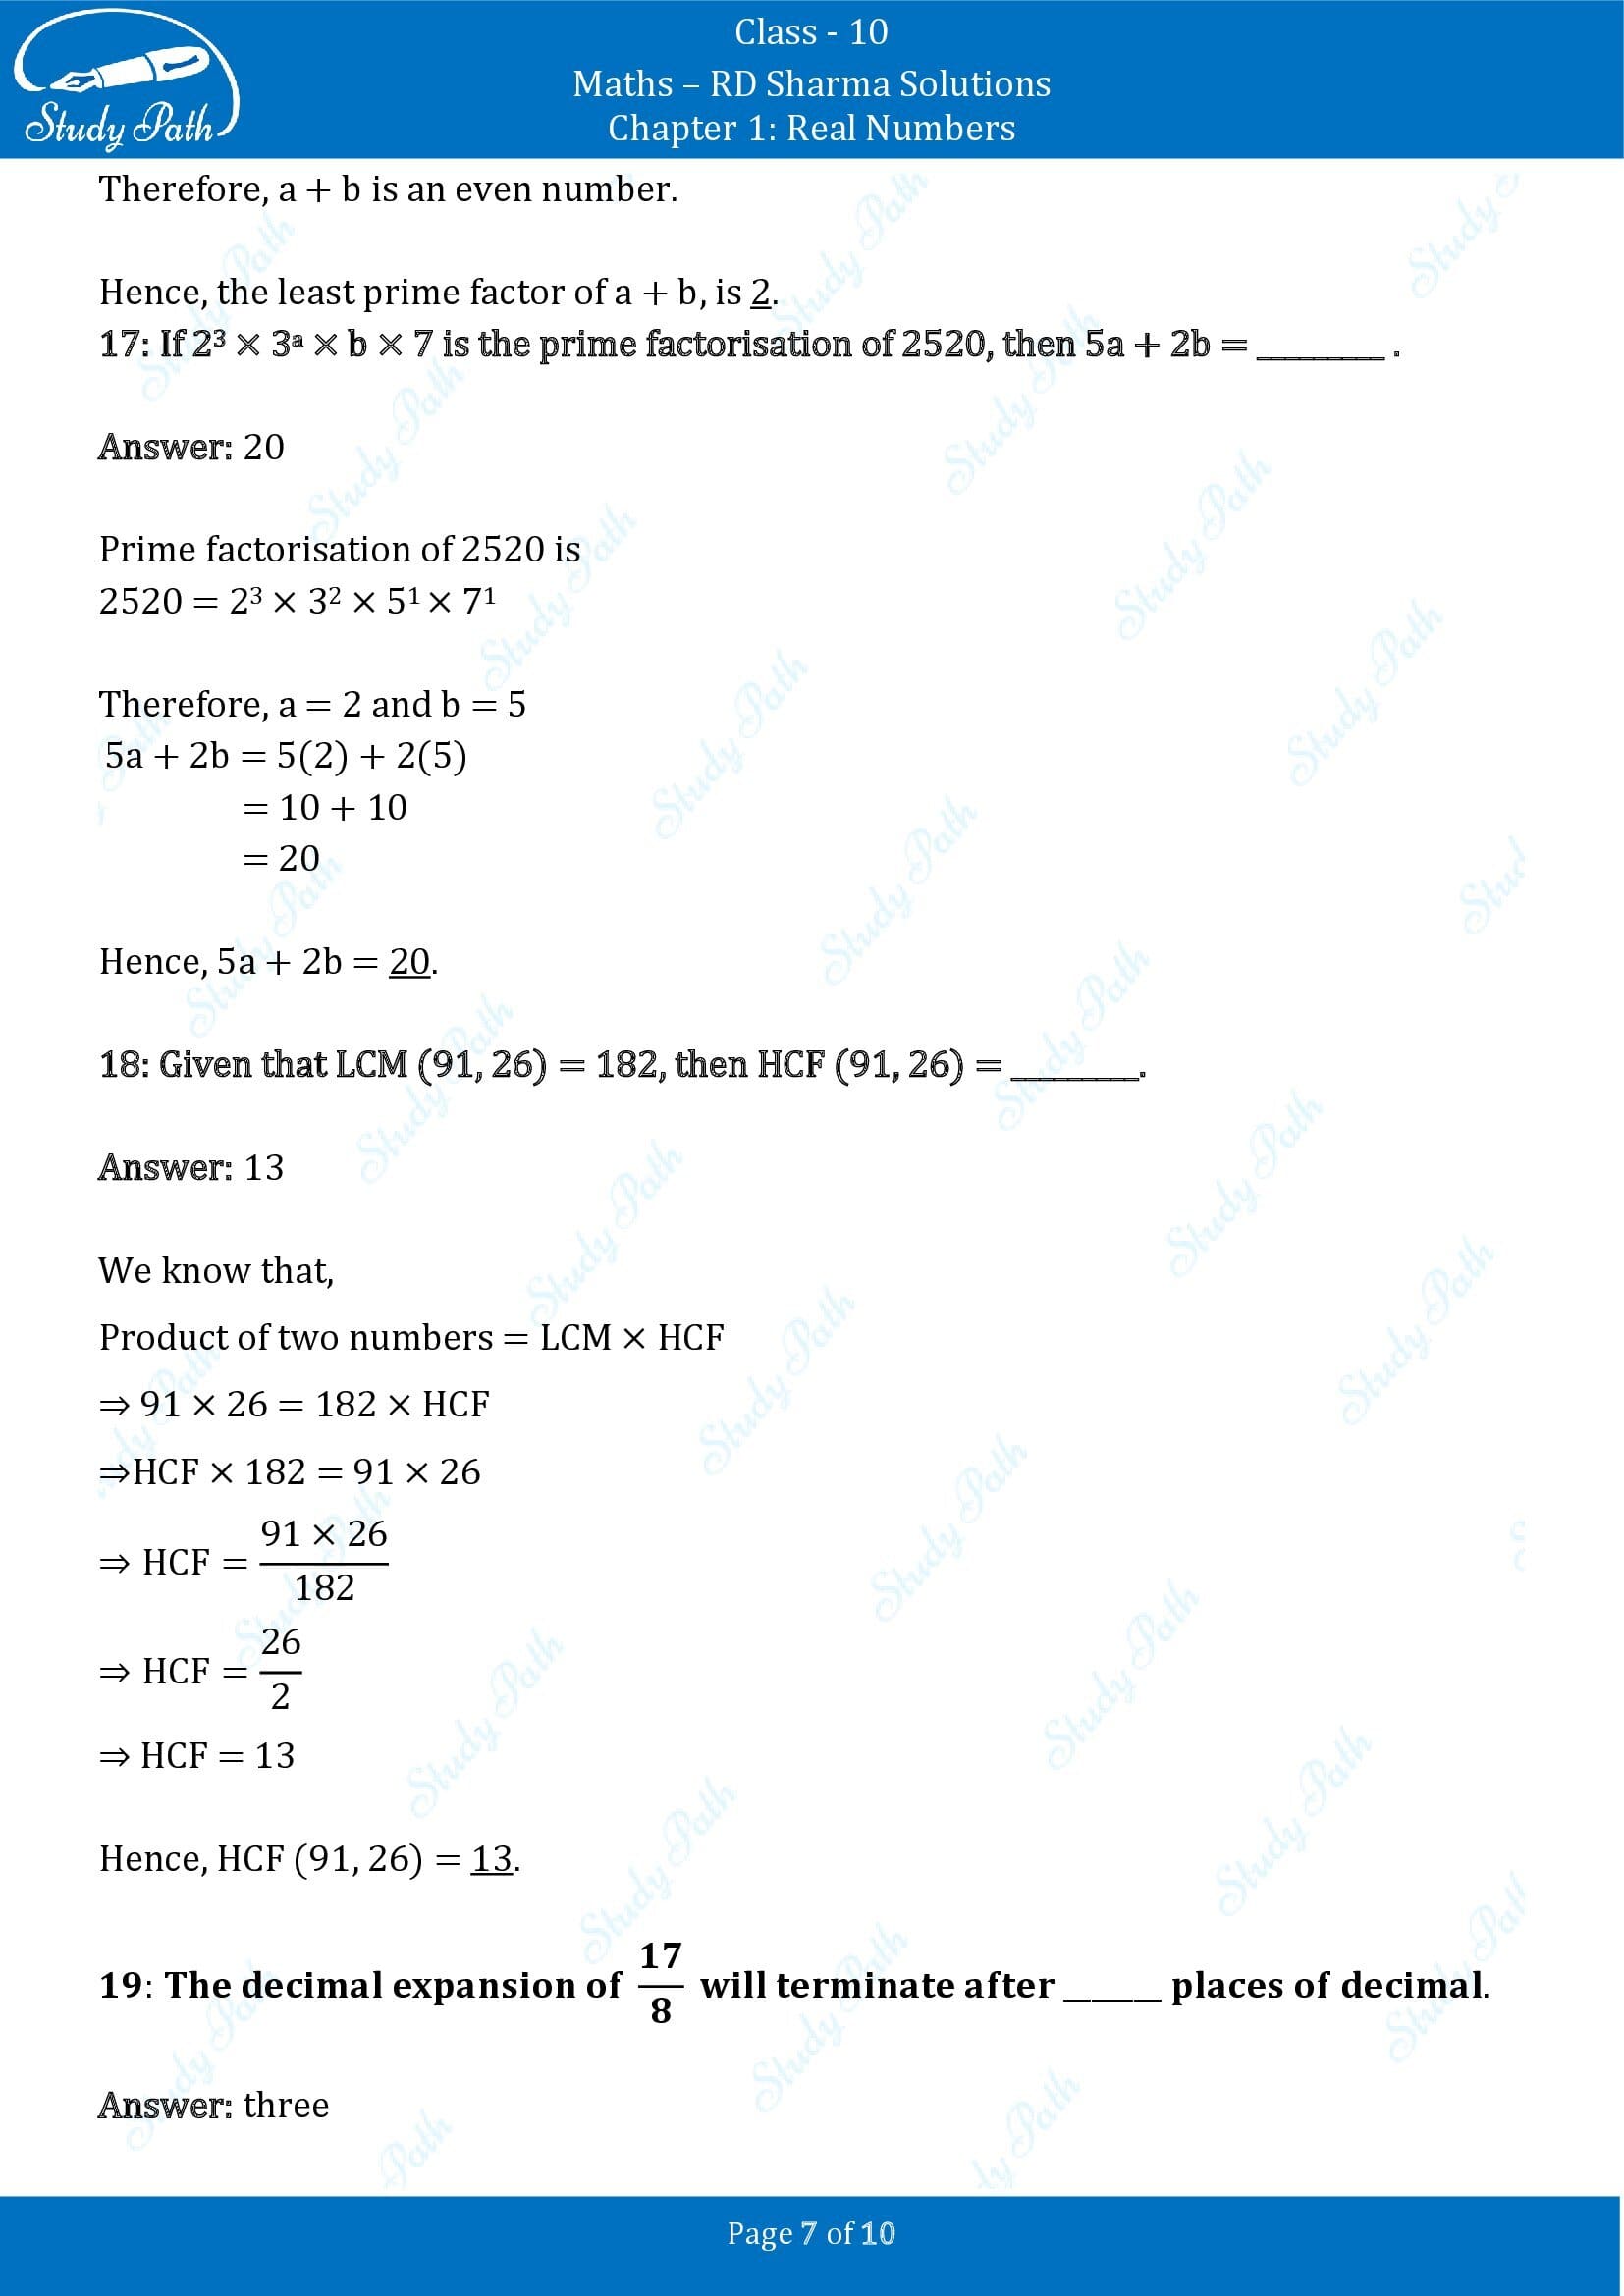 RD Sharma Solutions Class 10 Chapter 1 Real Numbers Fill in the Blank Type Questions FBQs 00007